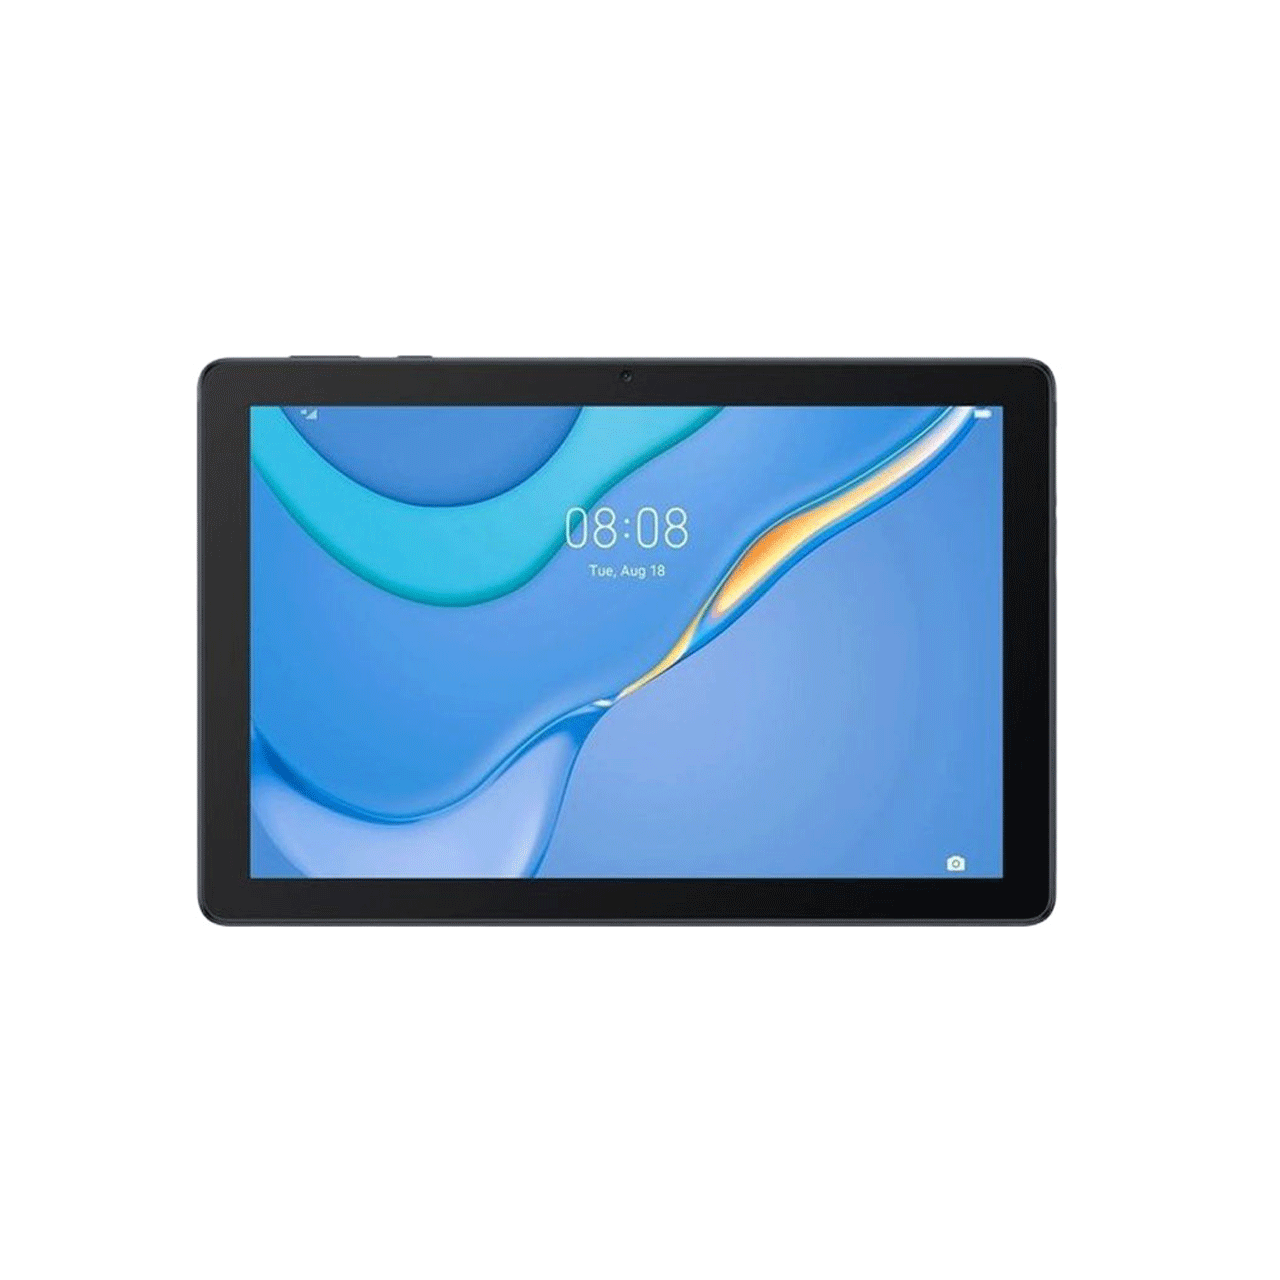 Huawei-MatePad-T10-LTE-16GB-Tablet